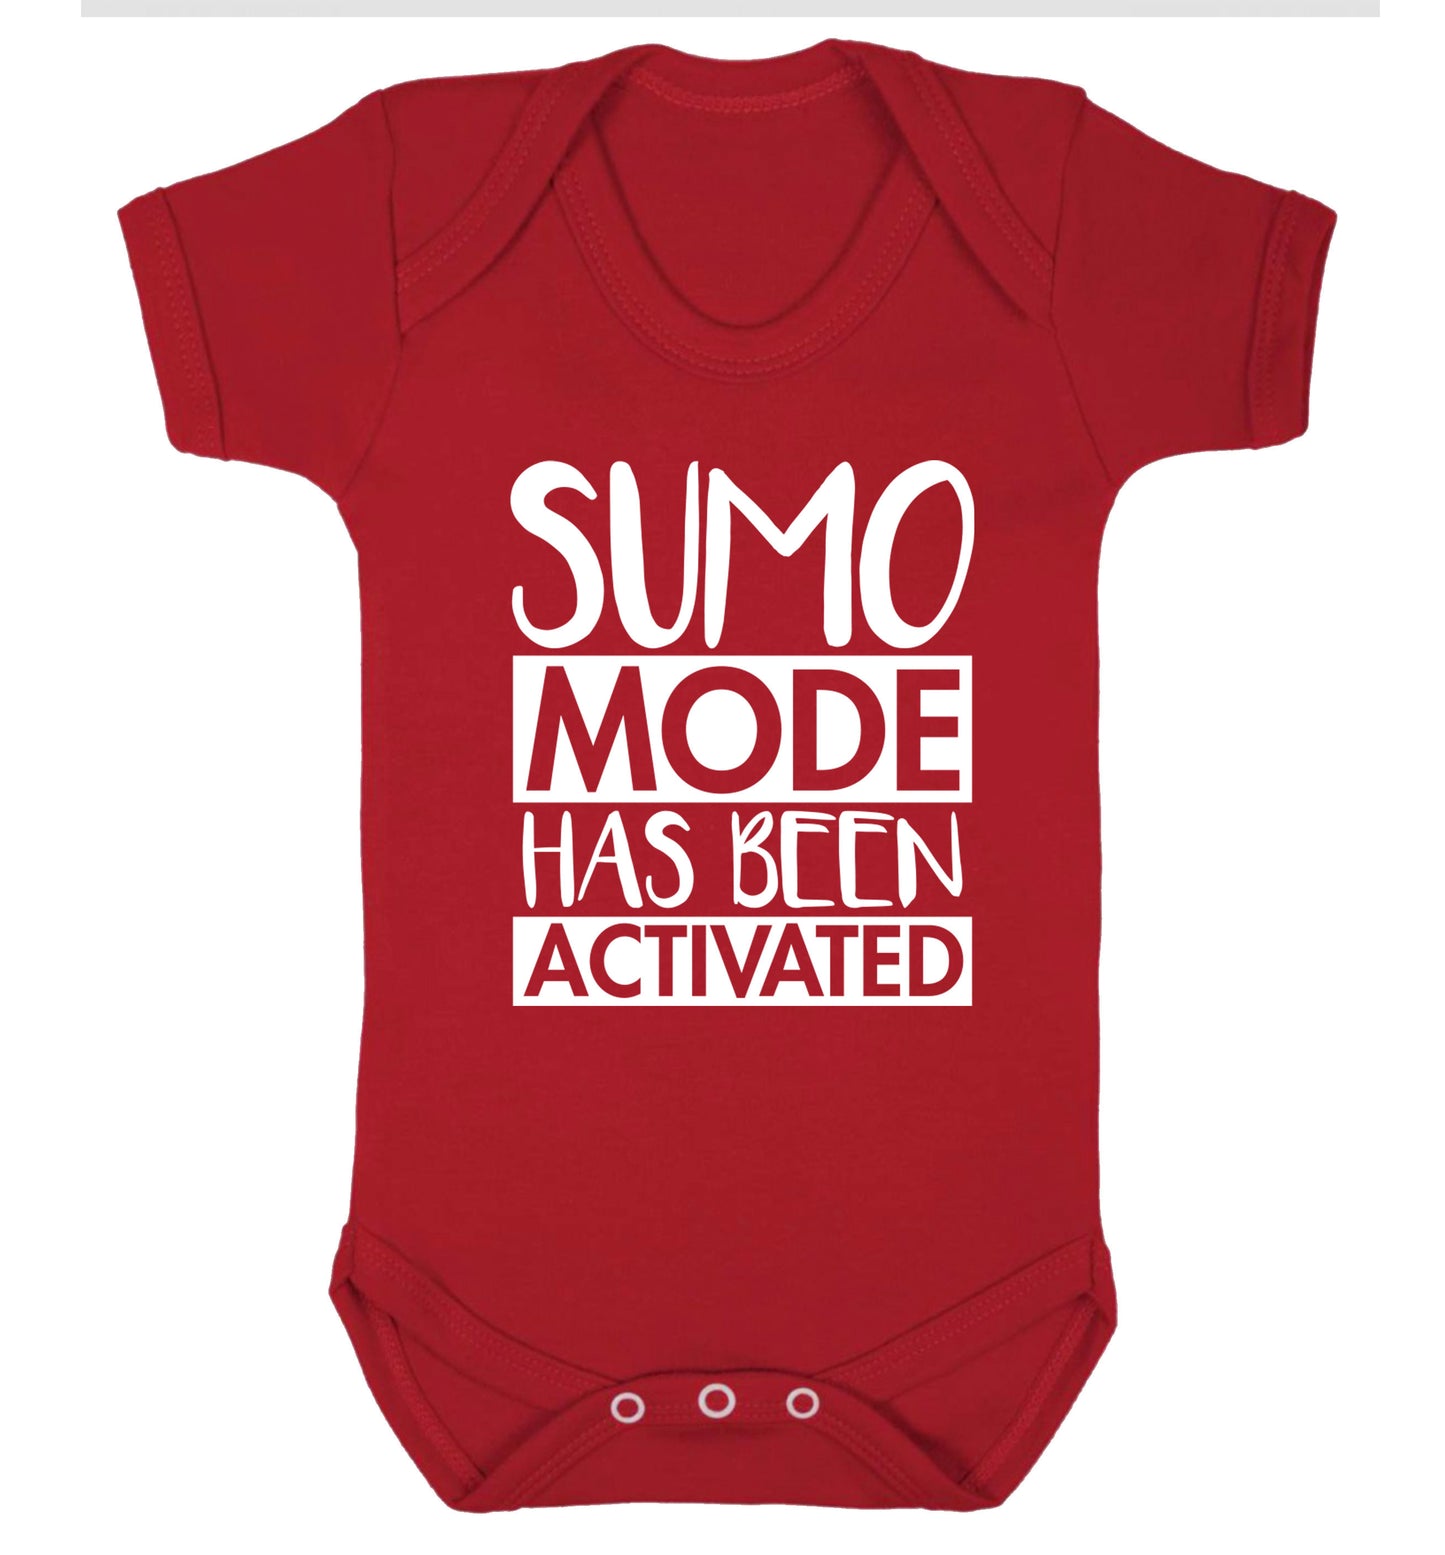 Sumo mode activated Baby Vest red 18-24 months